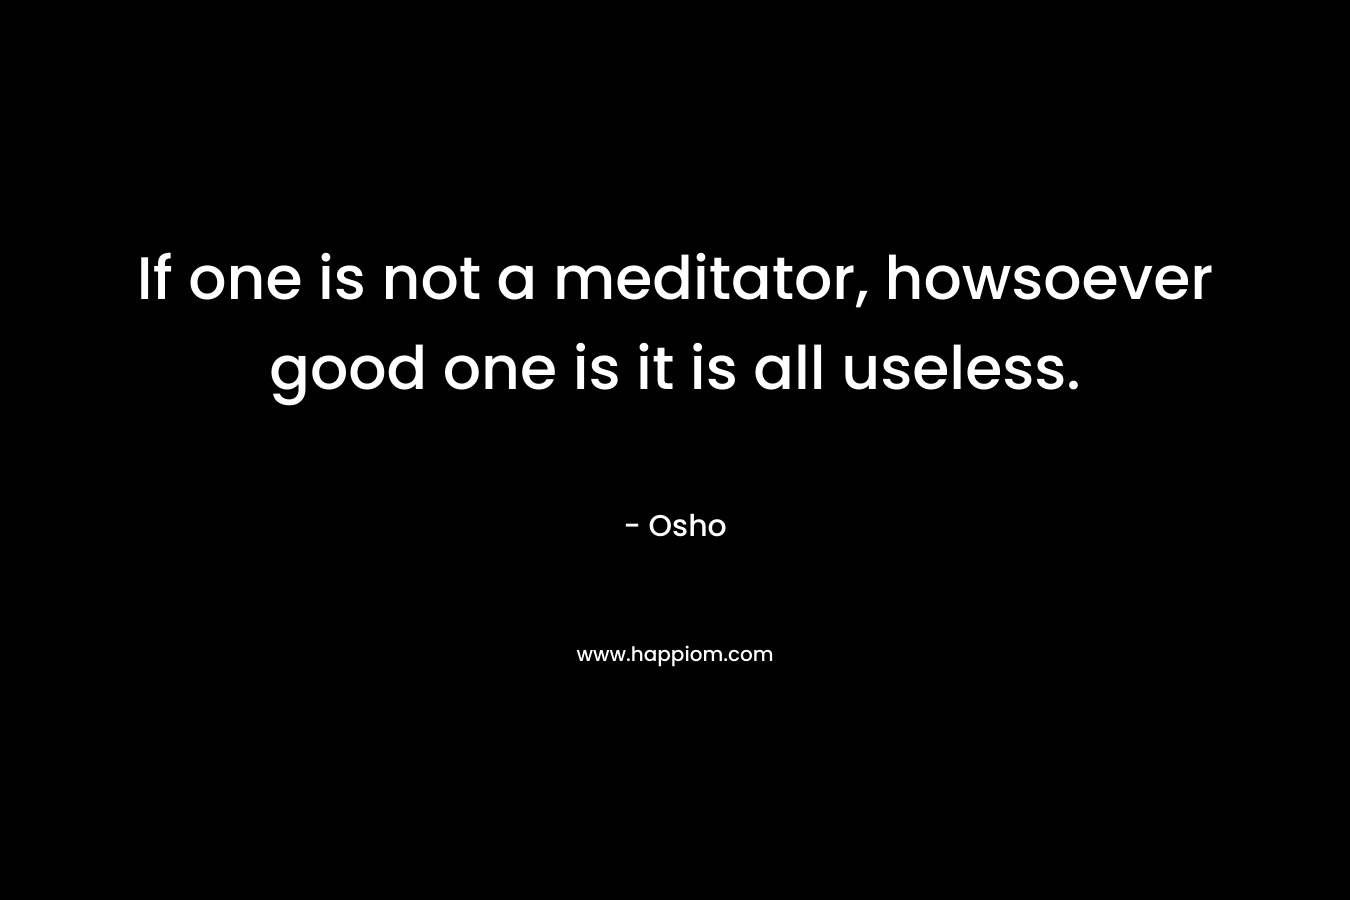 If one is not a meditator, howsoever good one is it is all useless.